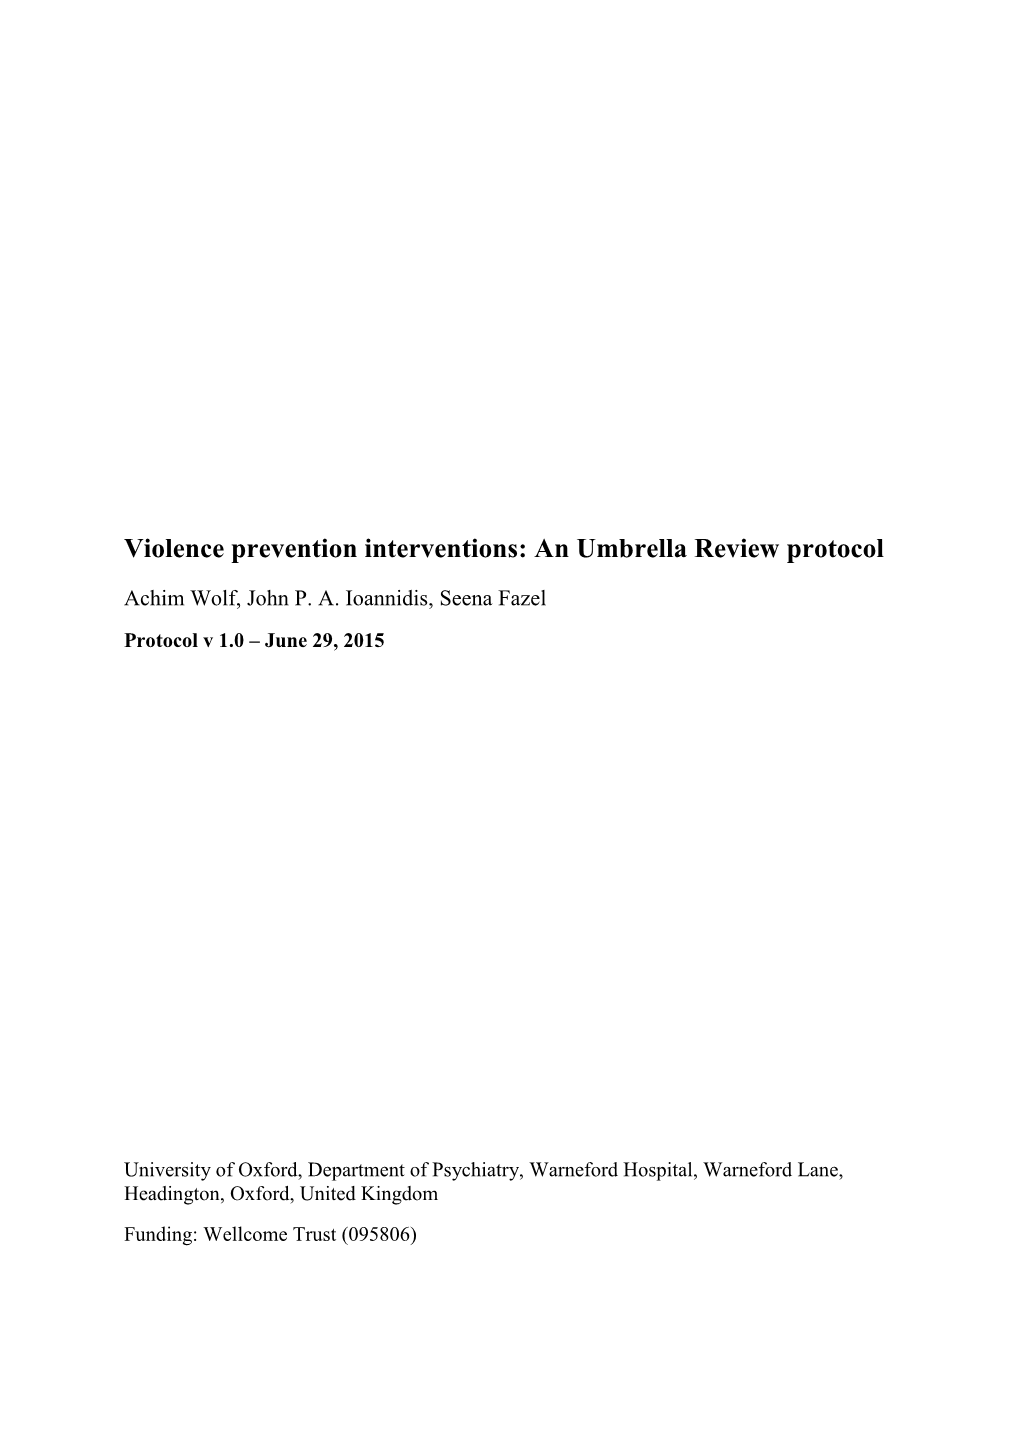 Violence Prevention Interventions: an Umbrella Review Protocol